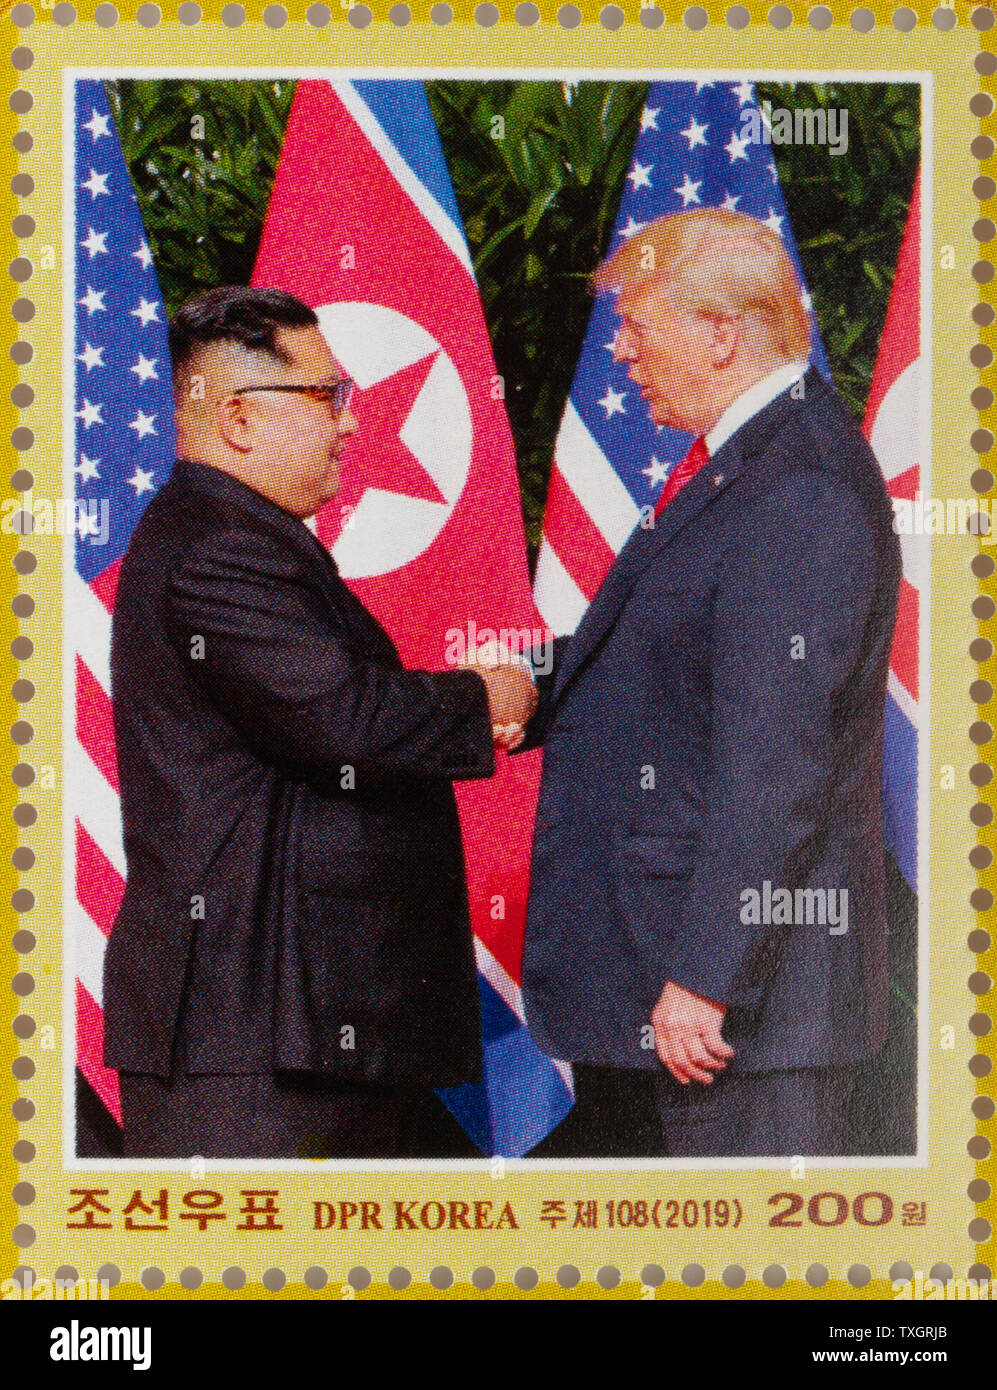 North Korea stamp celebrating the 2018 Singapore summit meeting between Donald J. Trump and Kim Jong-un with picture of the handshake Stock Photo